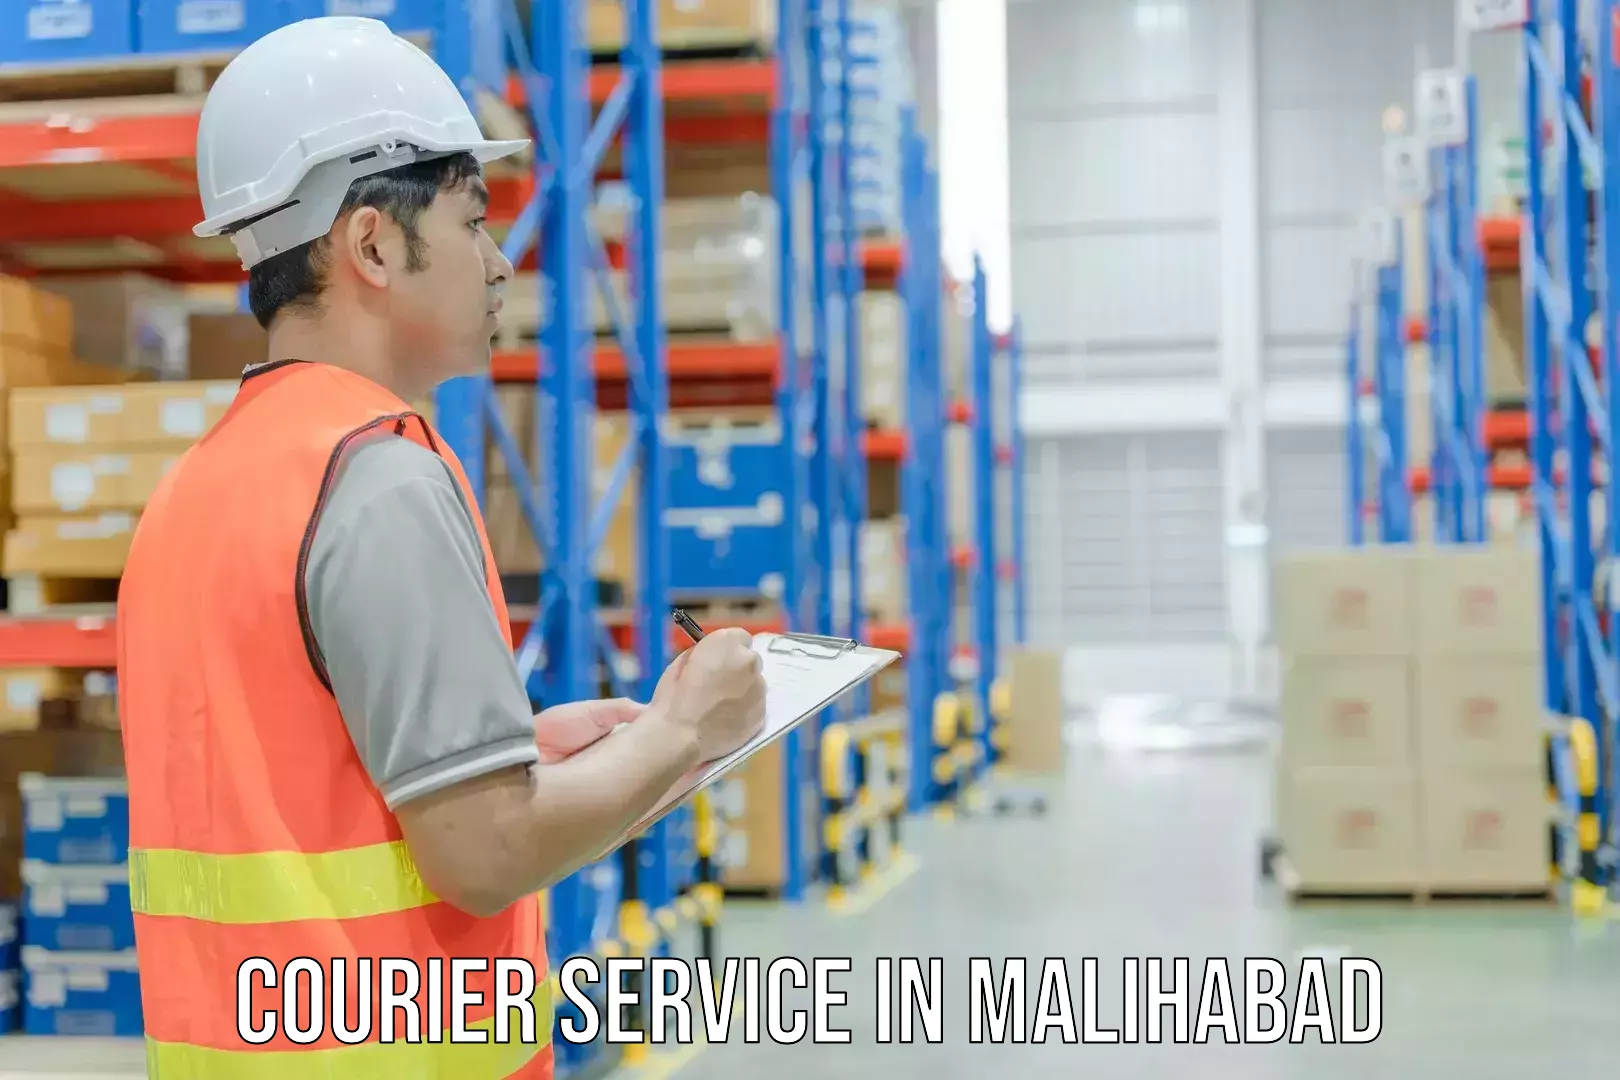 Rapid shipping services in Malihabad